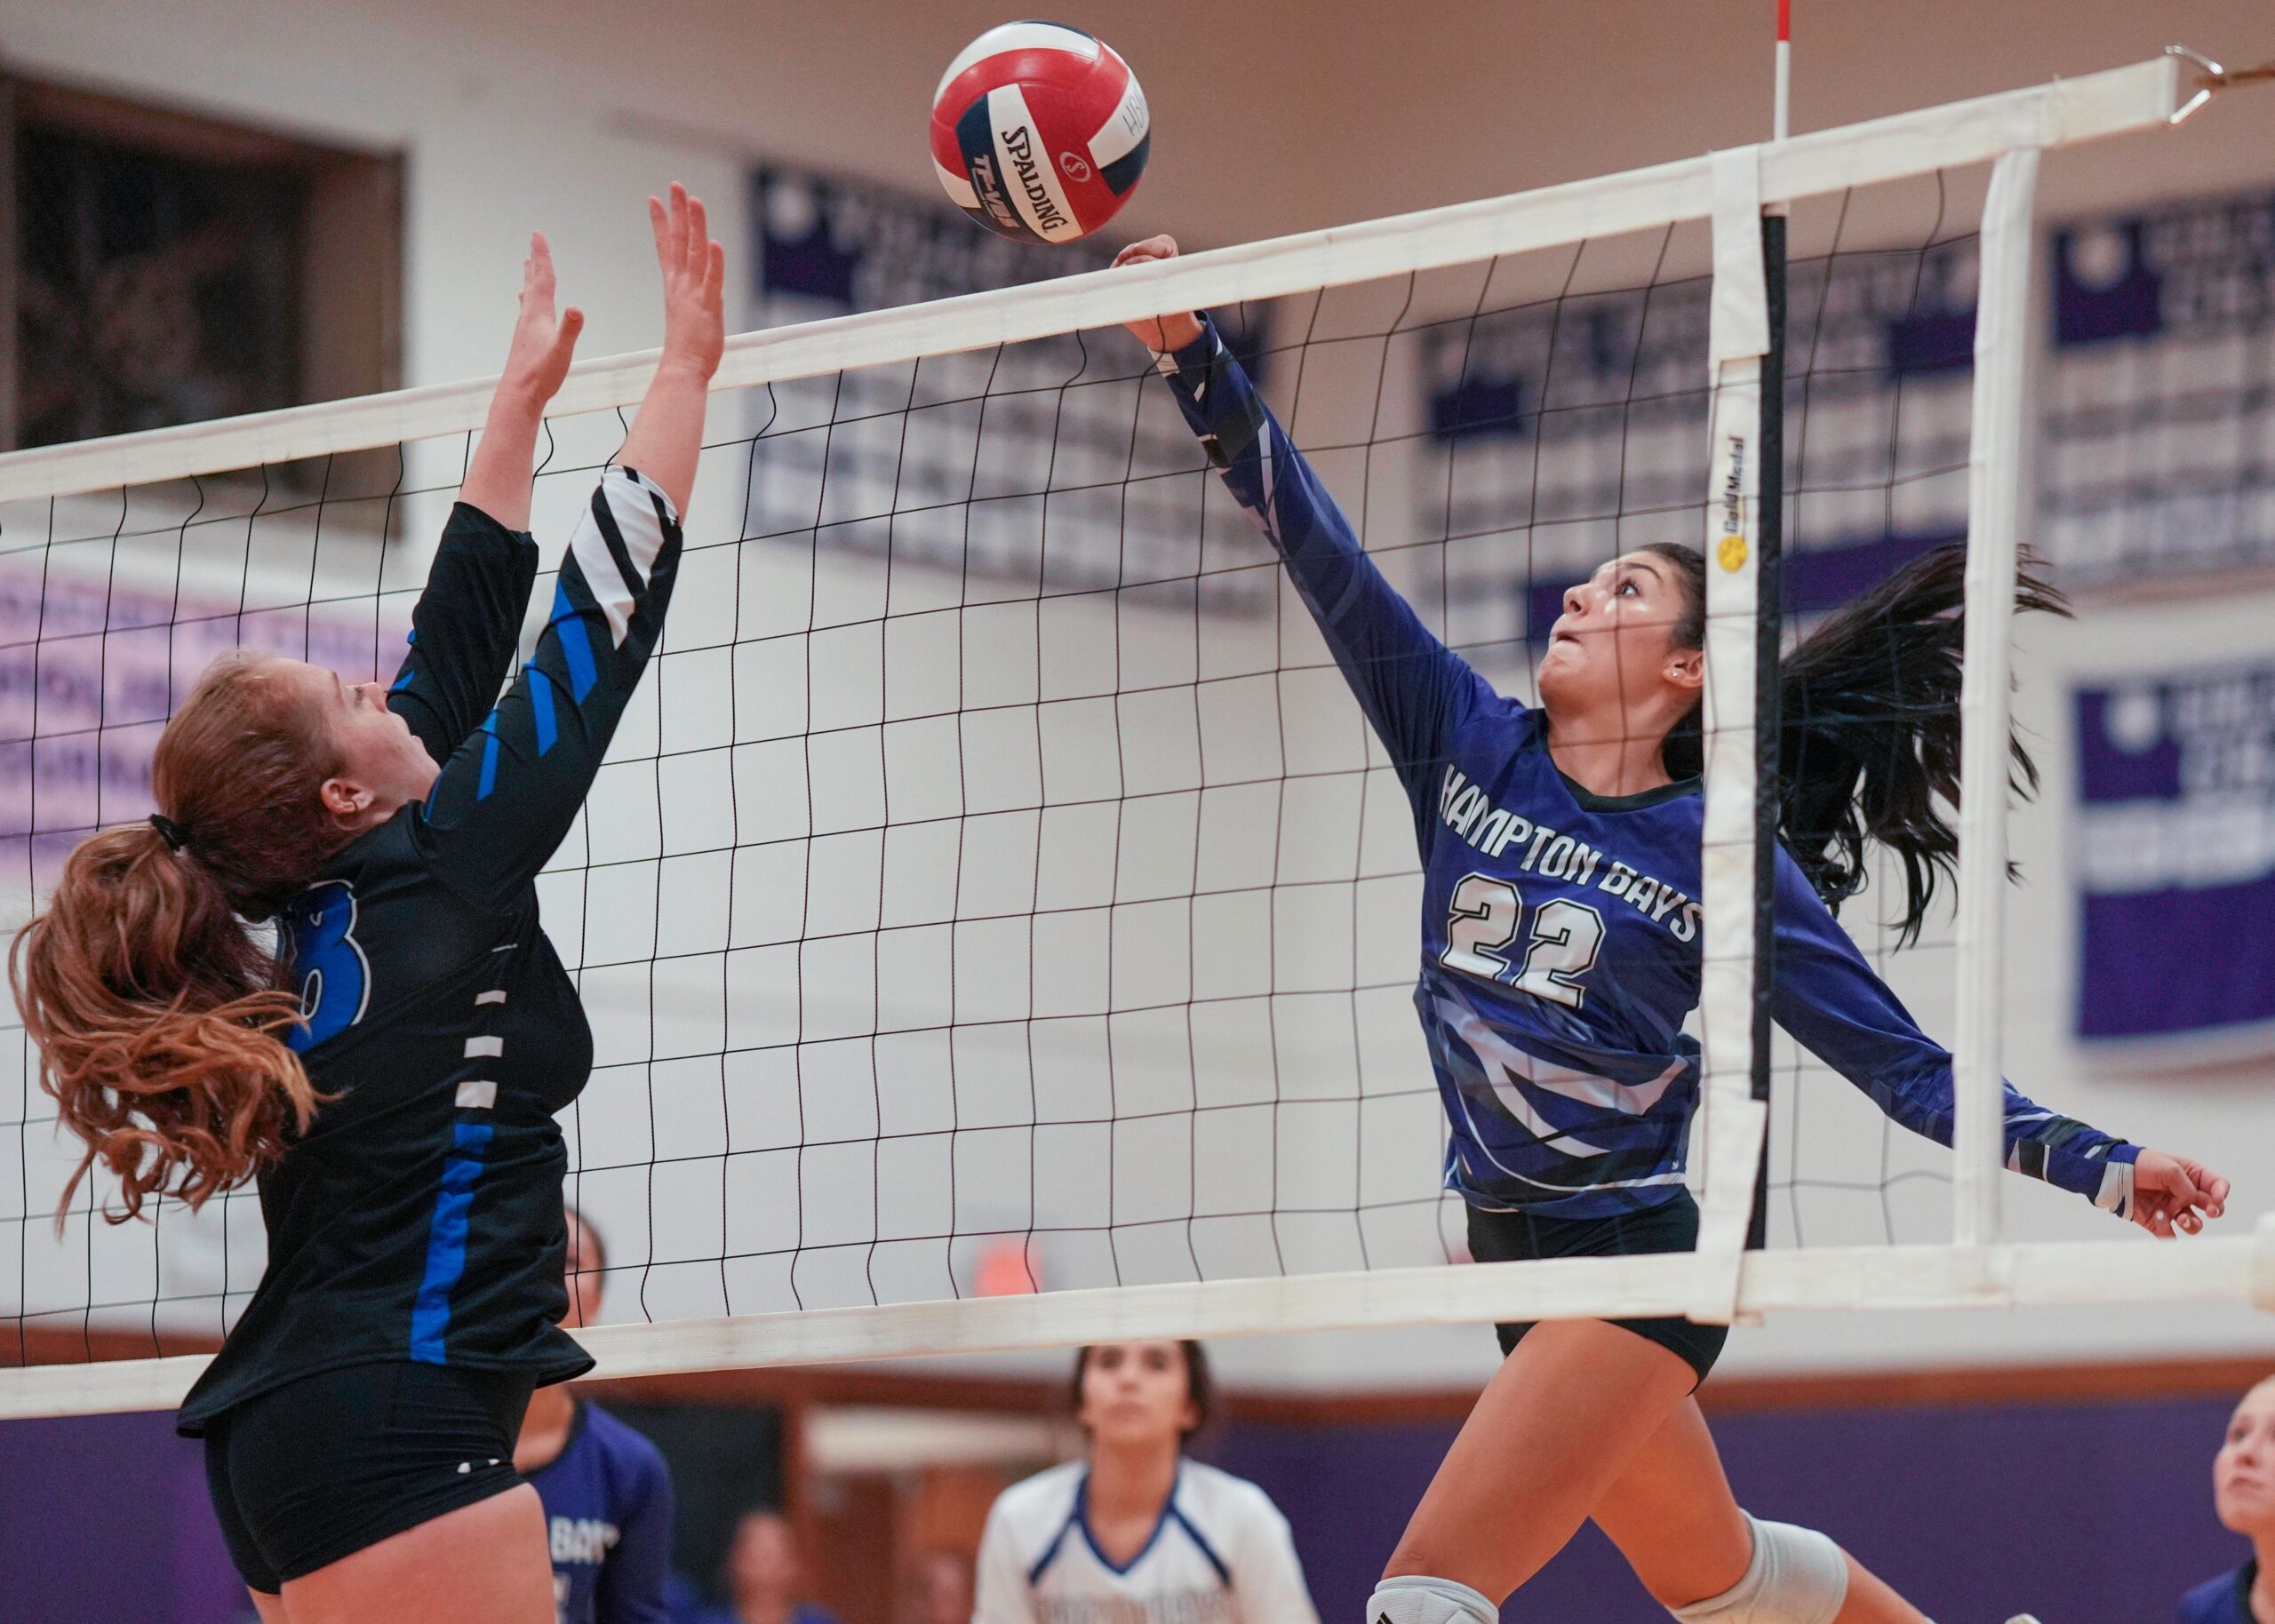 Junior outside hitter Tania Quiros sends the ball back over the net. RON ESPOSITO